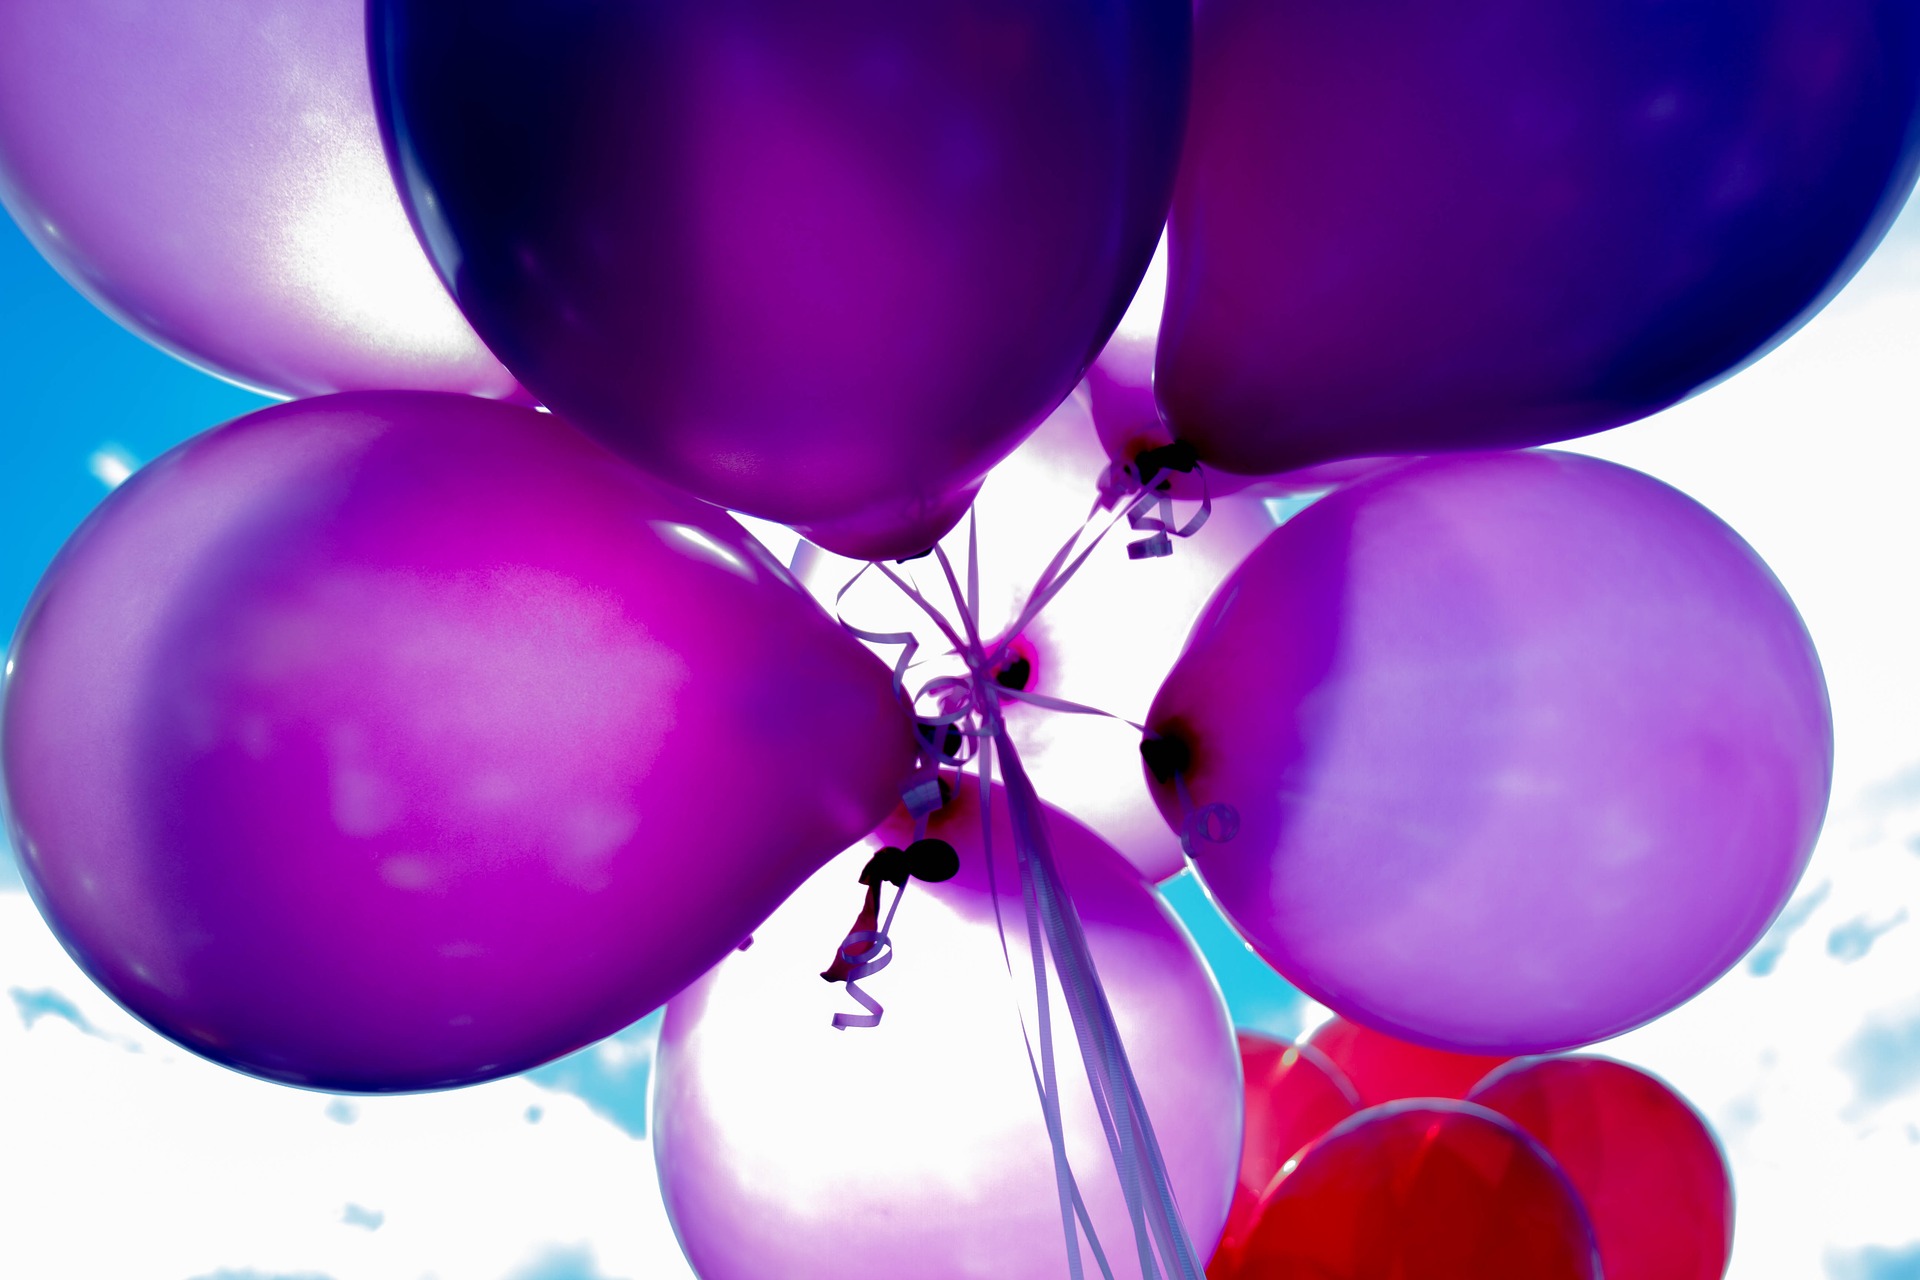 Picture of several purple balloons tied together.